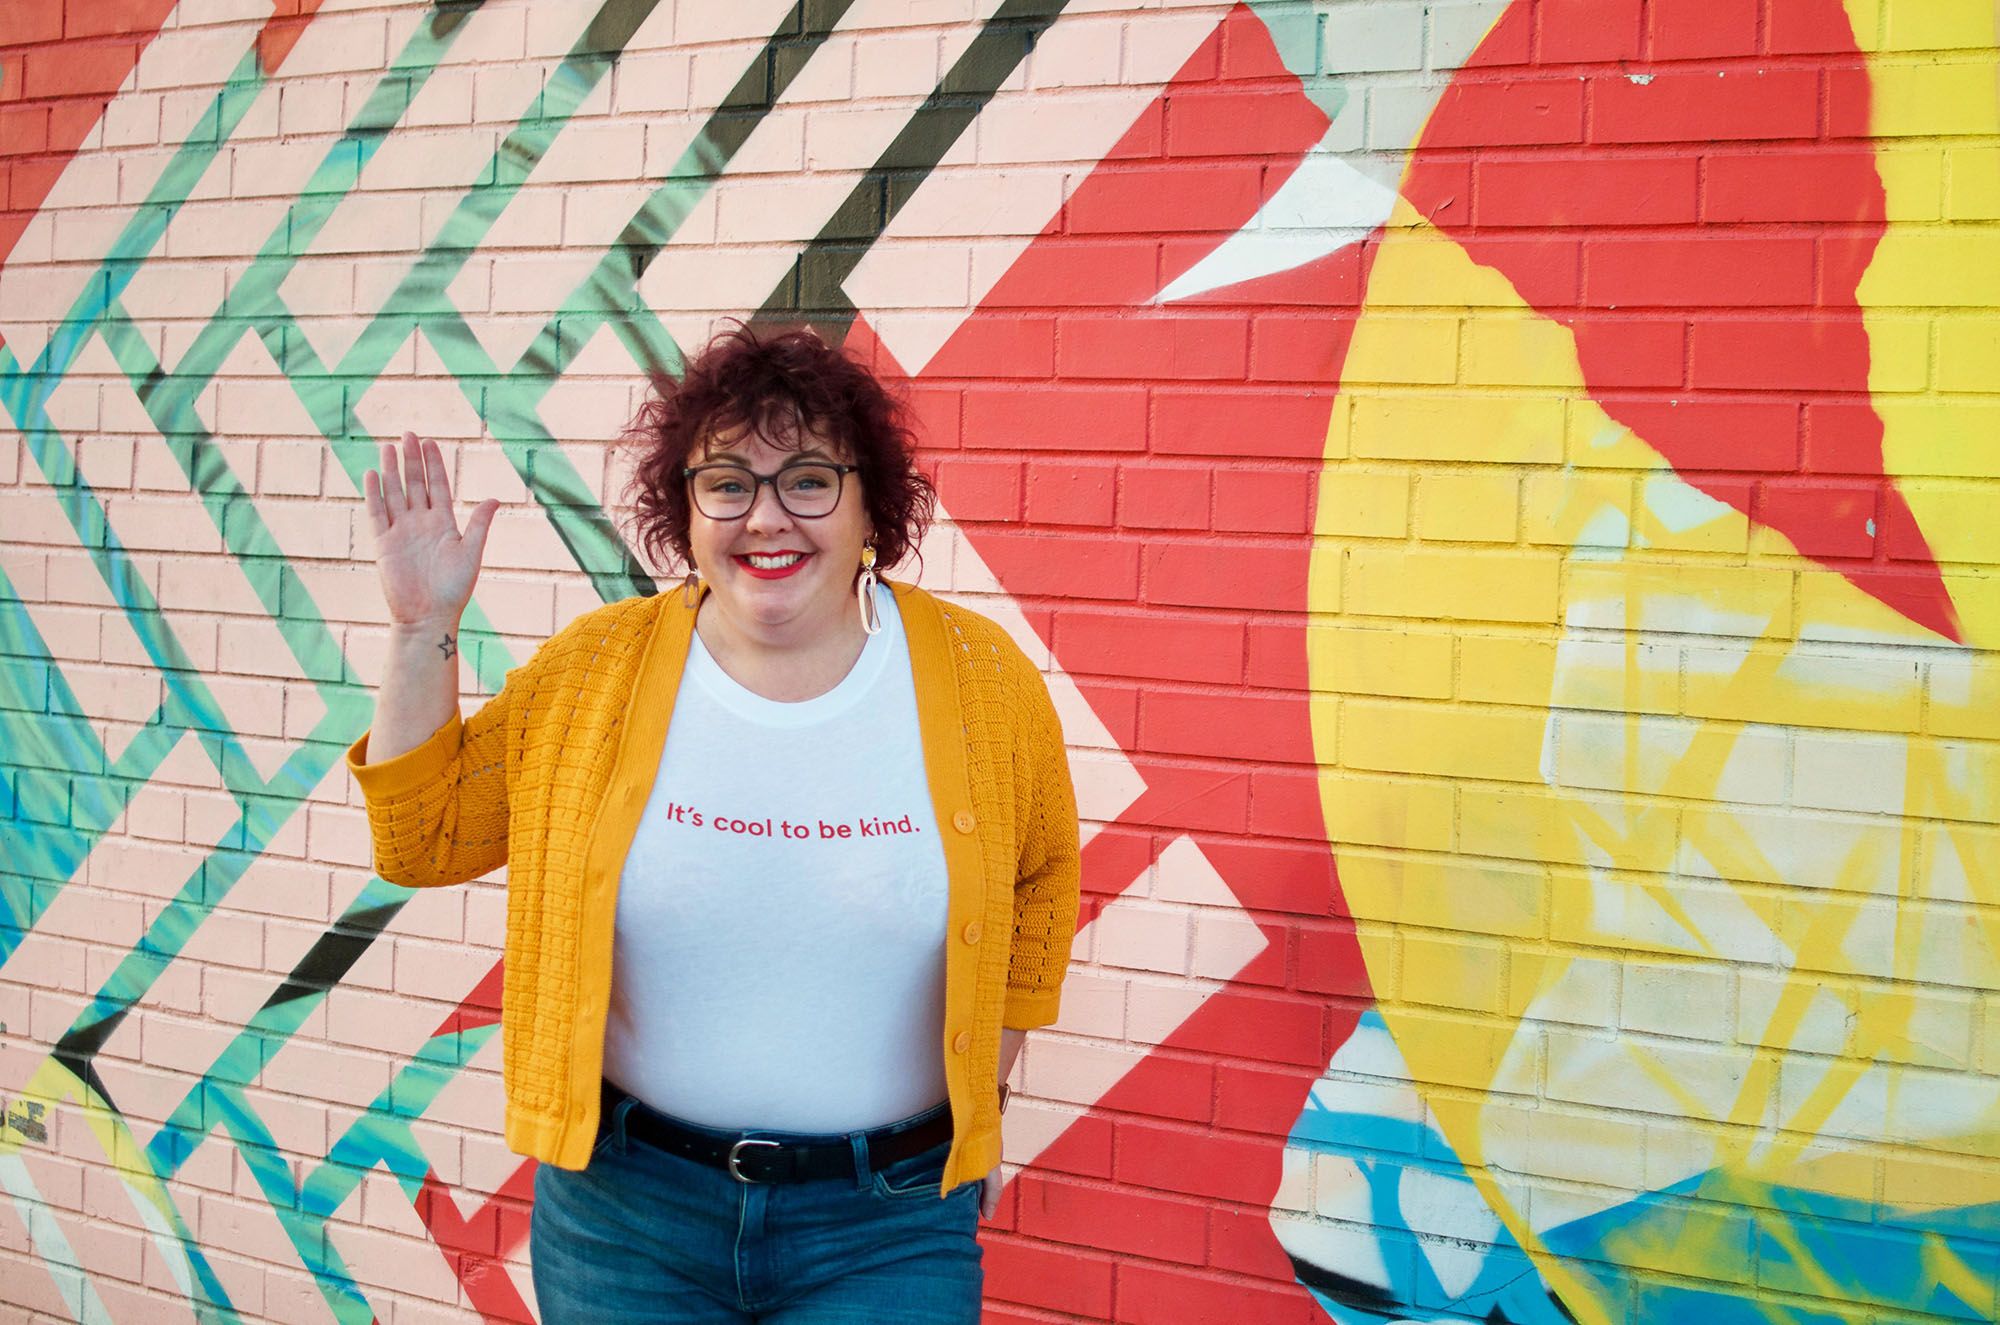 Kim Cota standing in front of a colourful mural wall, smiling and waving one hand